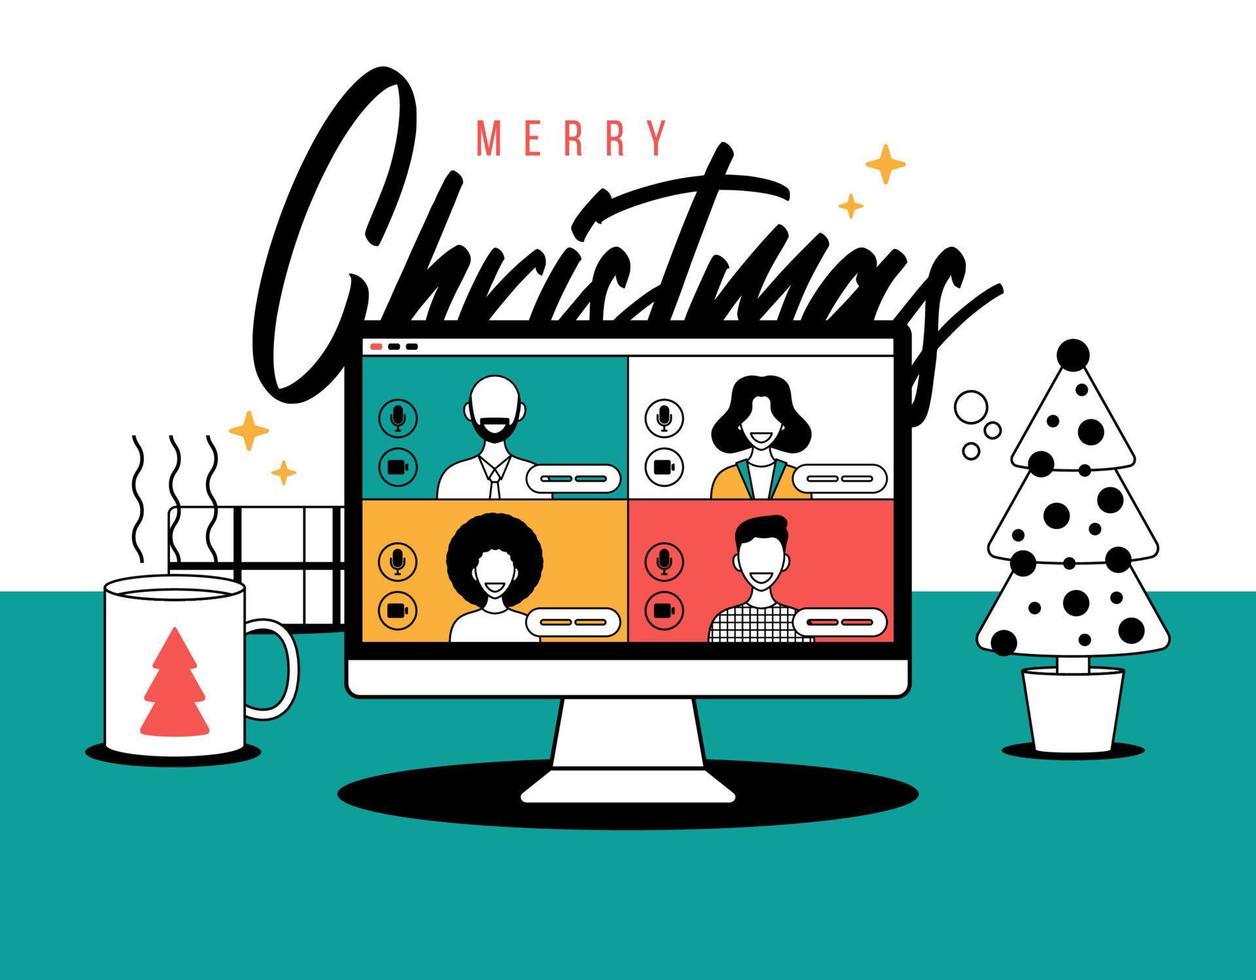 Christmas online greeting in outline style. people meeting online together with family or friends video calling on computer virtual discussion. Group of people meeting via videoconference on xmas vector